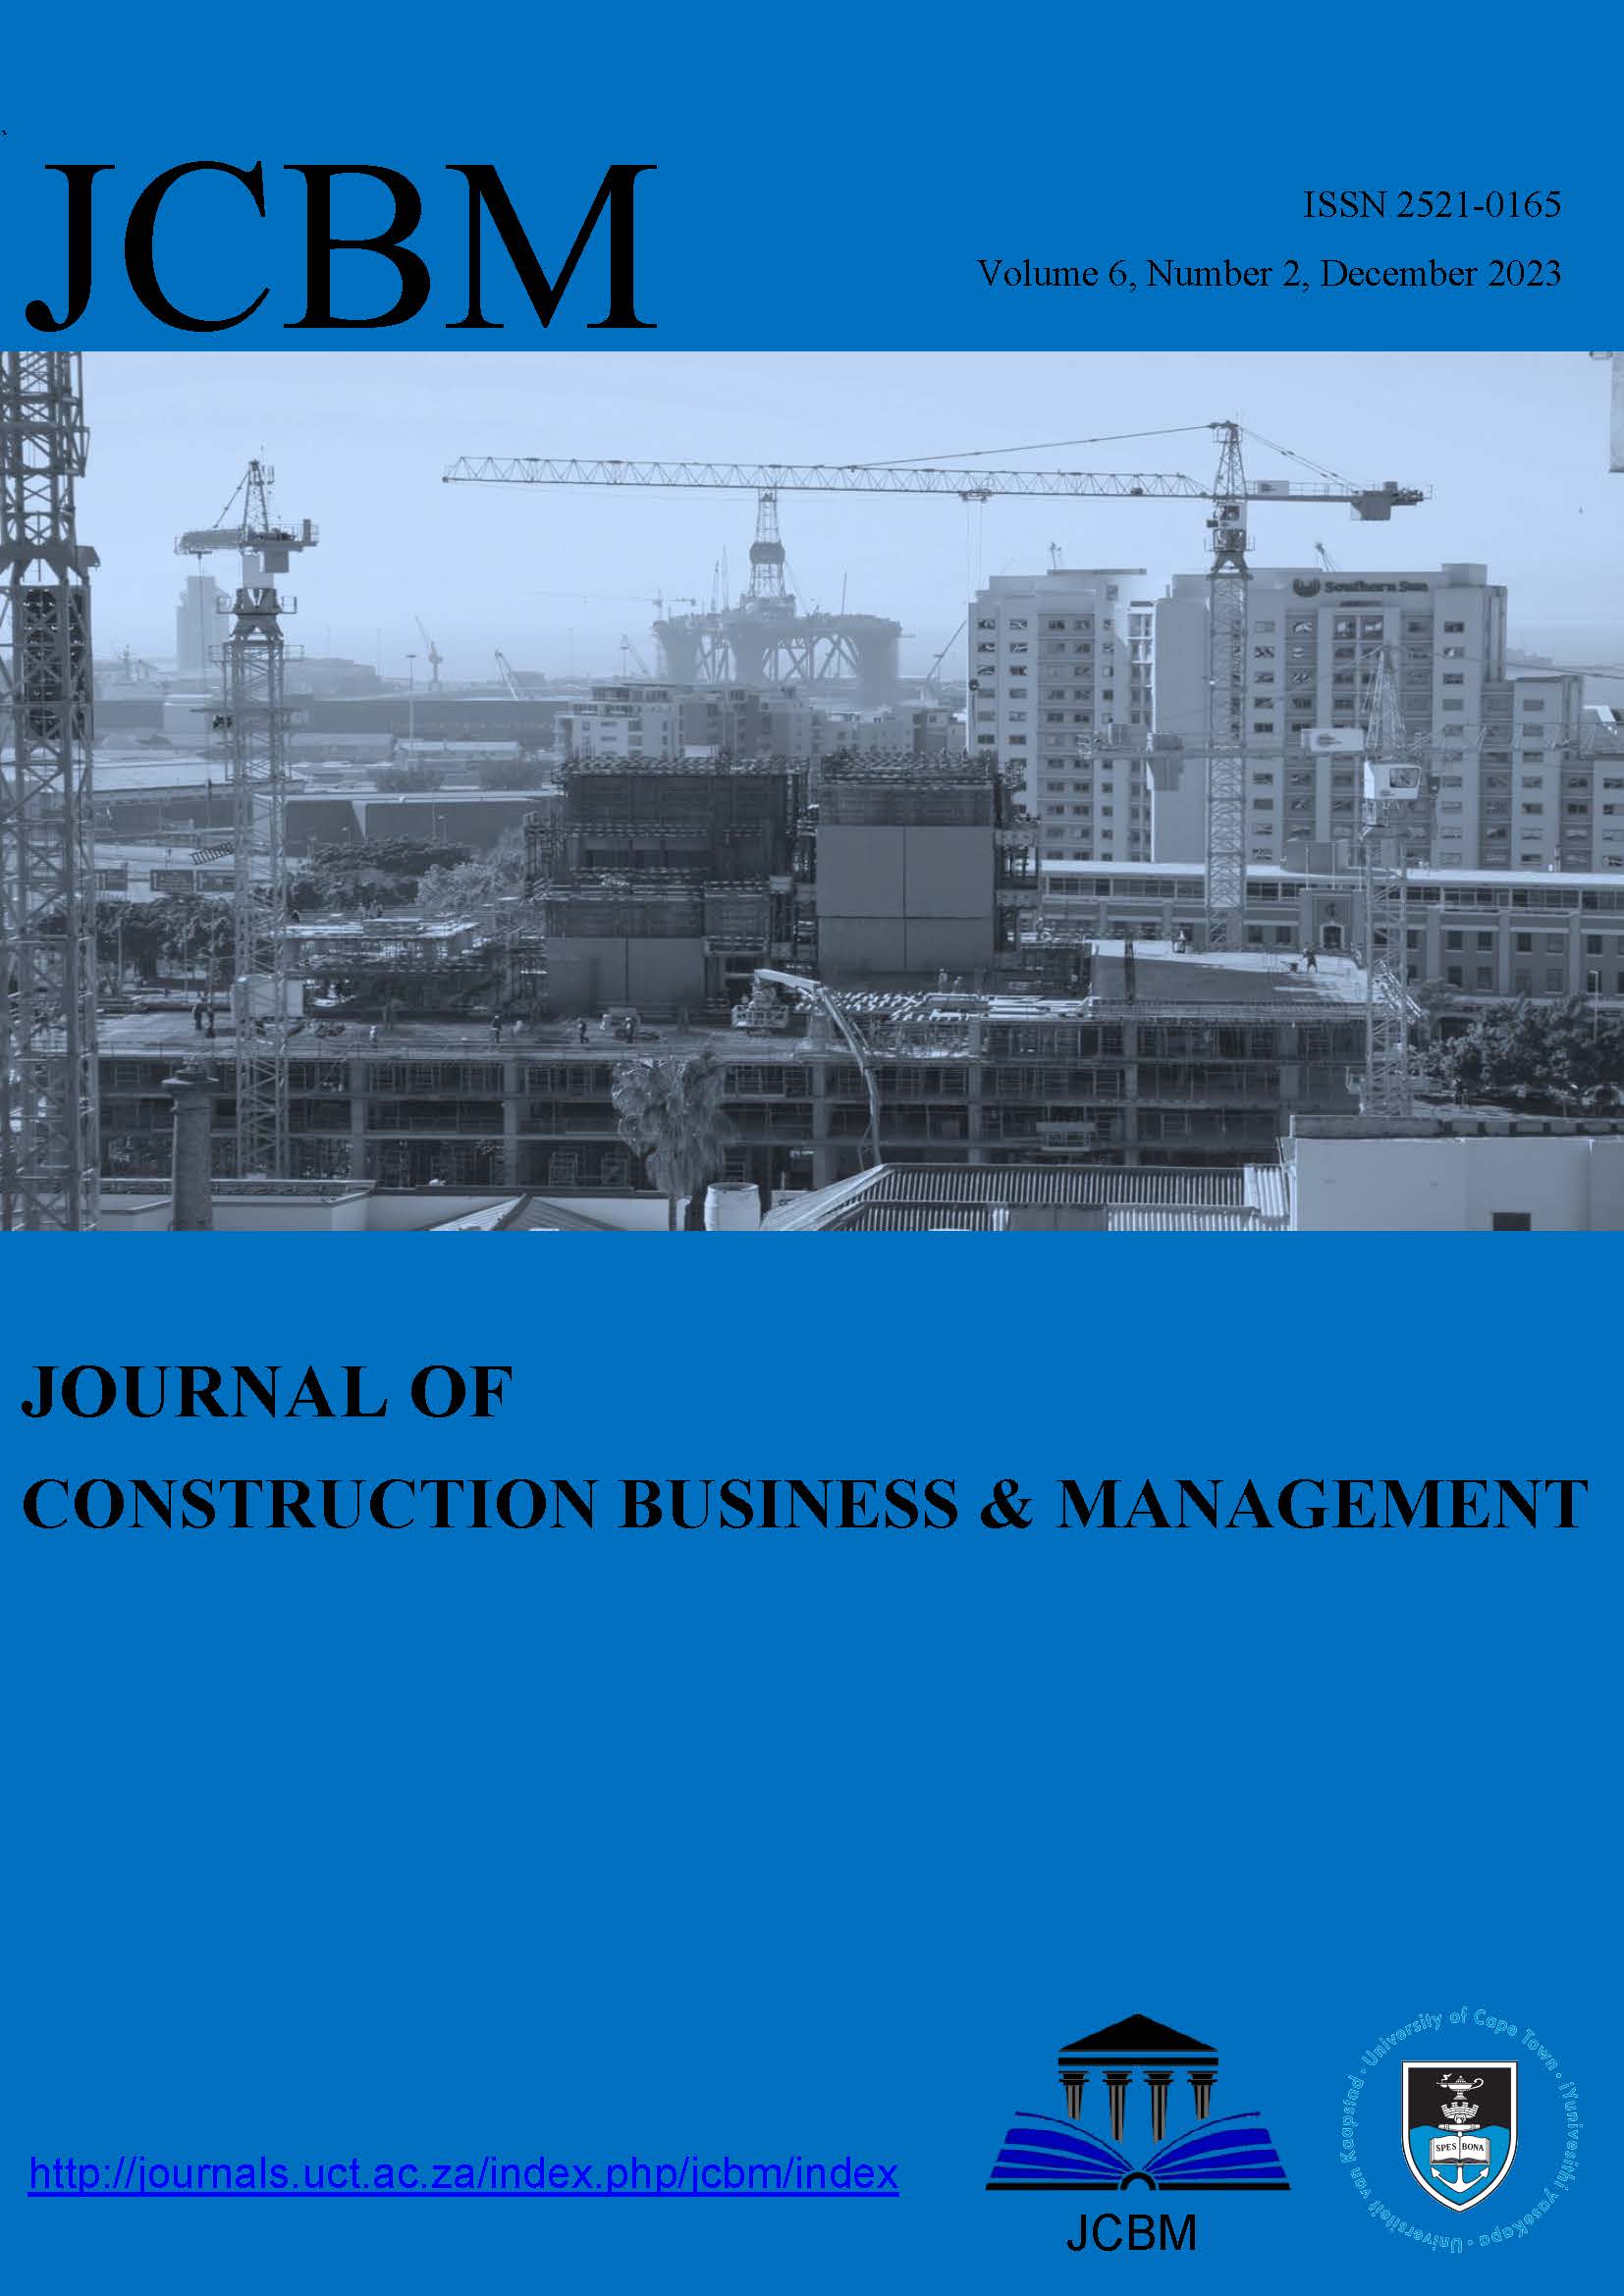 Cover page of the Journal of Construction Business and Management, Volume 6, Issue 2, December 2023